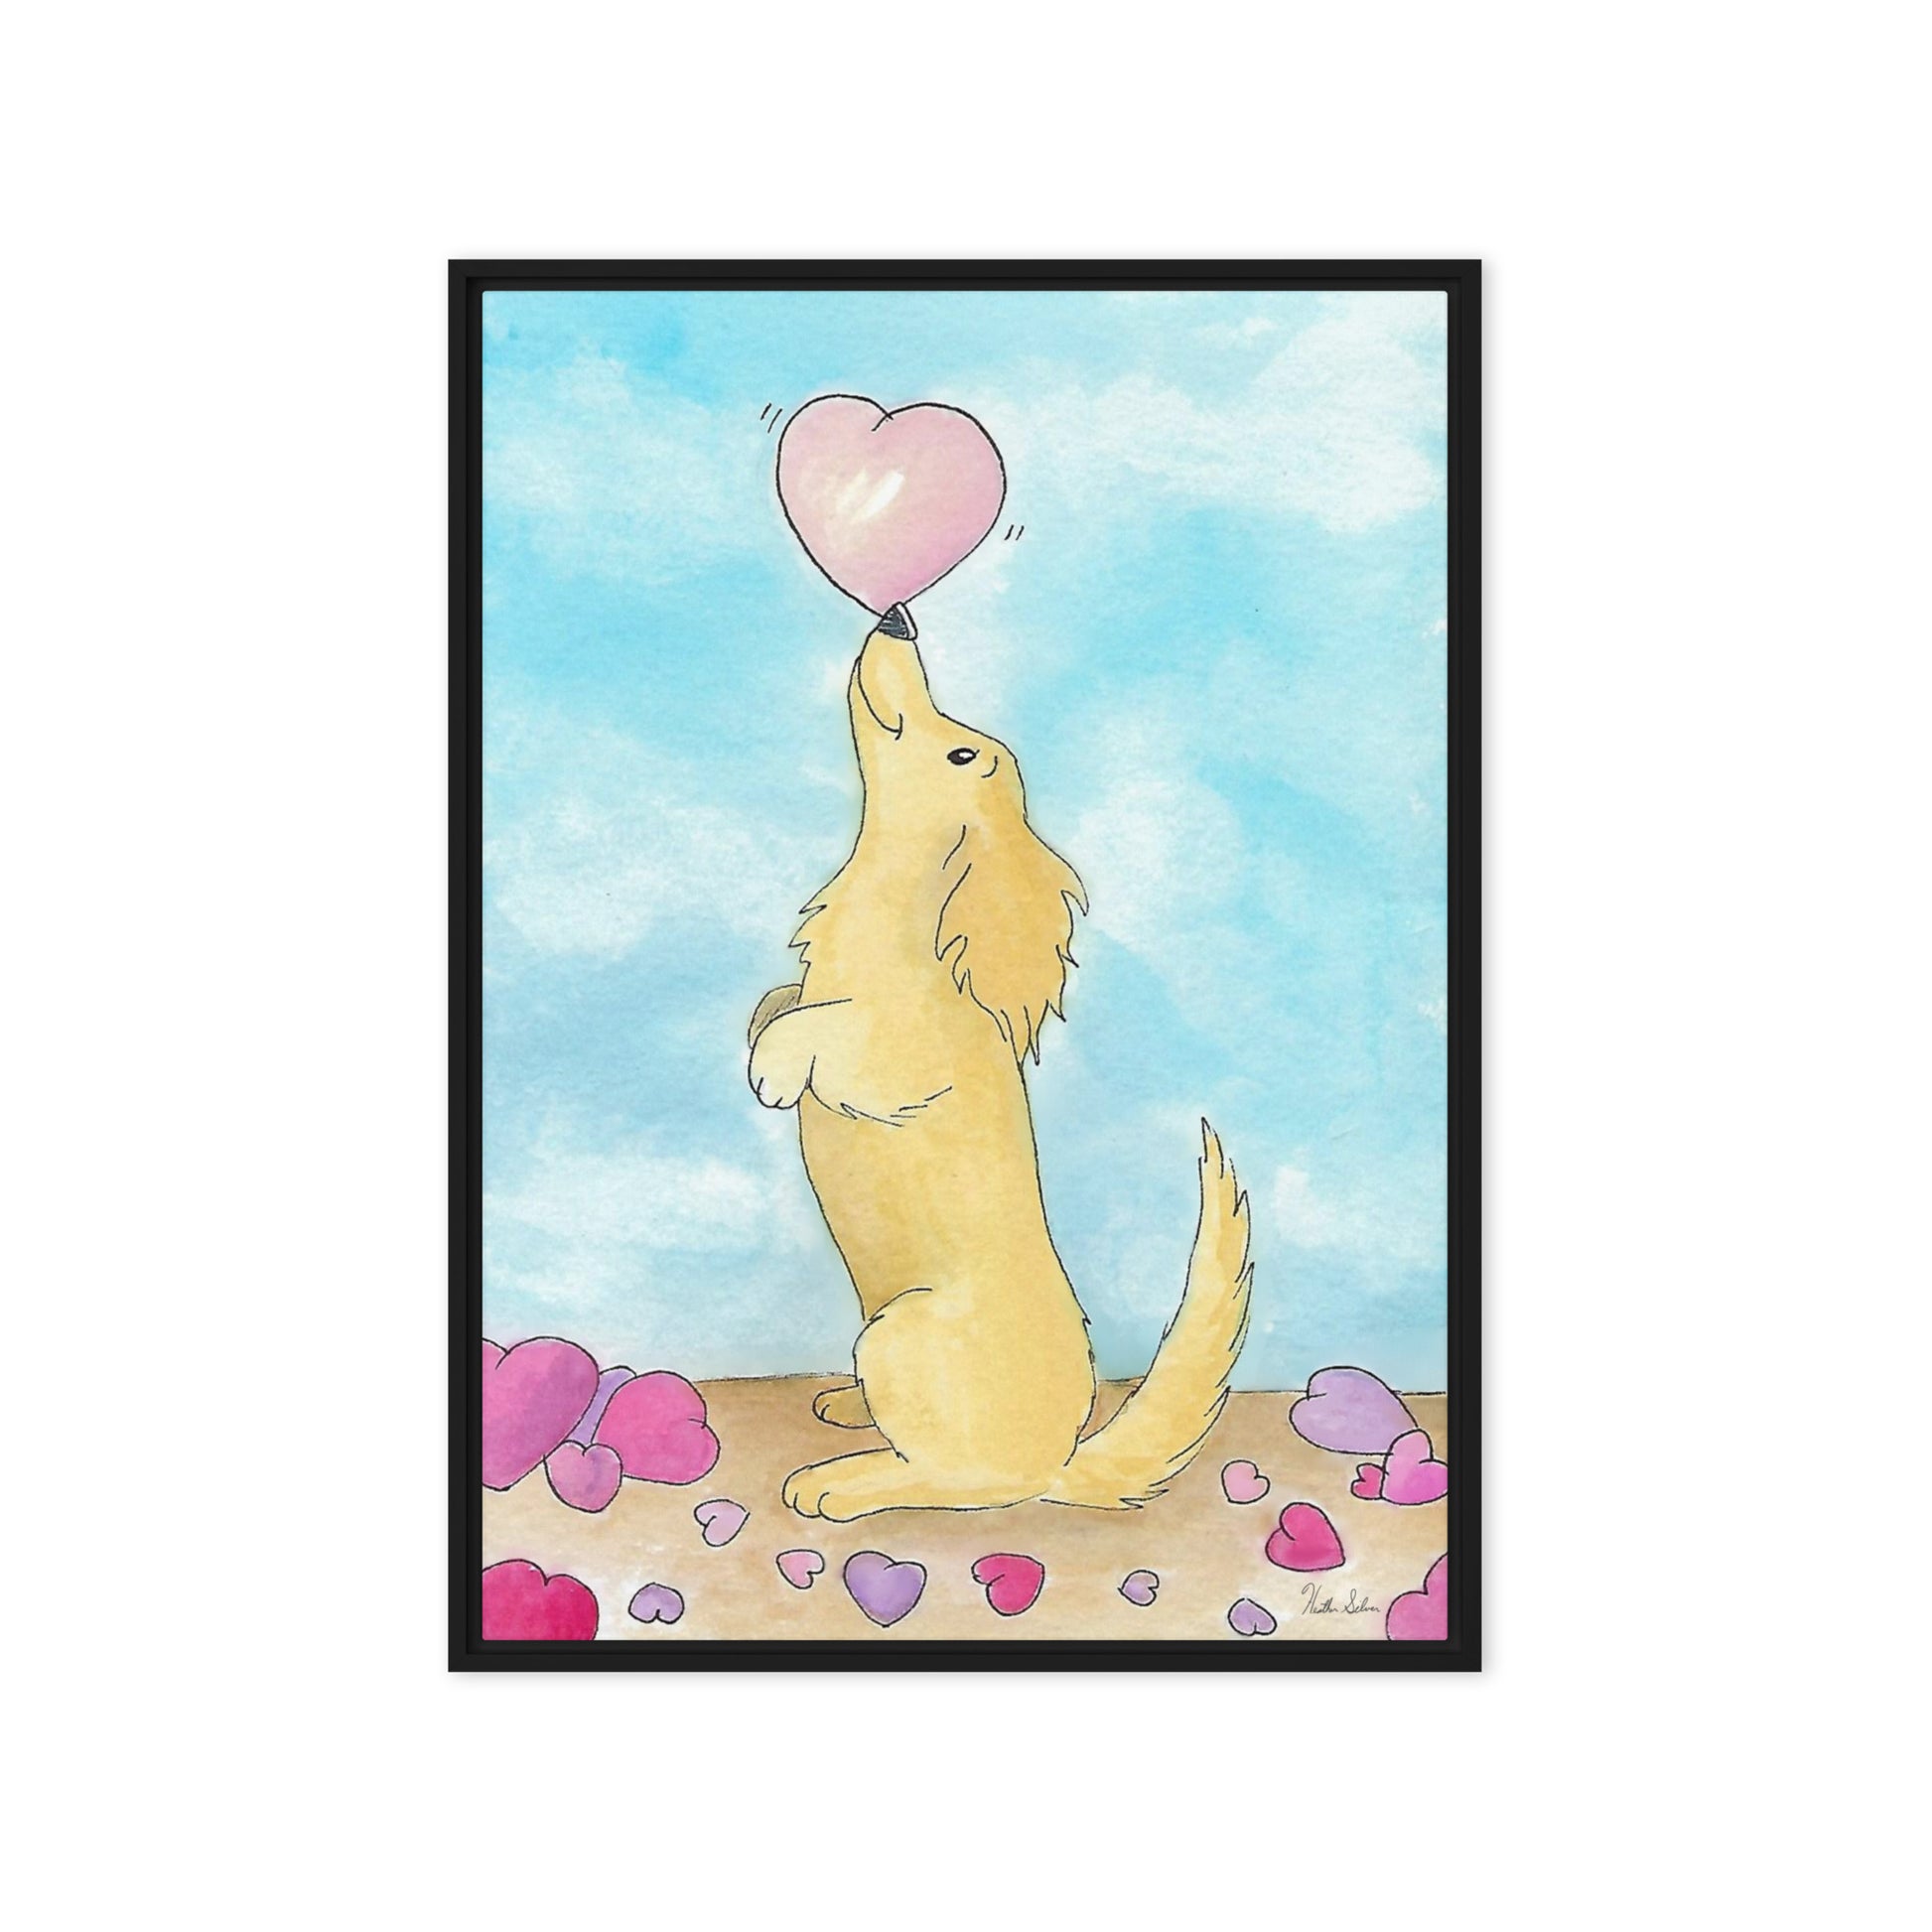 20 by 28 inch framed canvas Puppy Love print. The canvas is in a black pine wood frame.